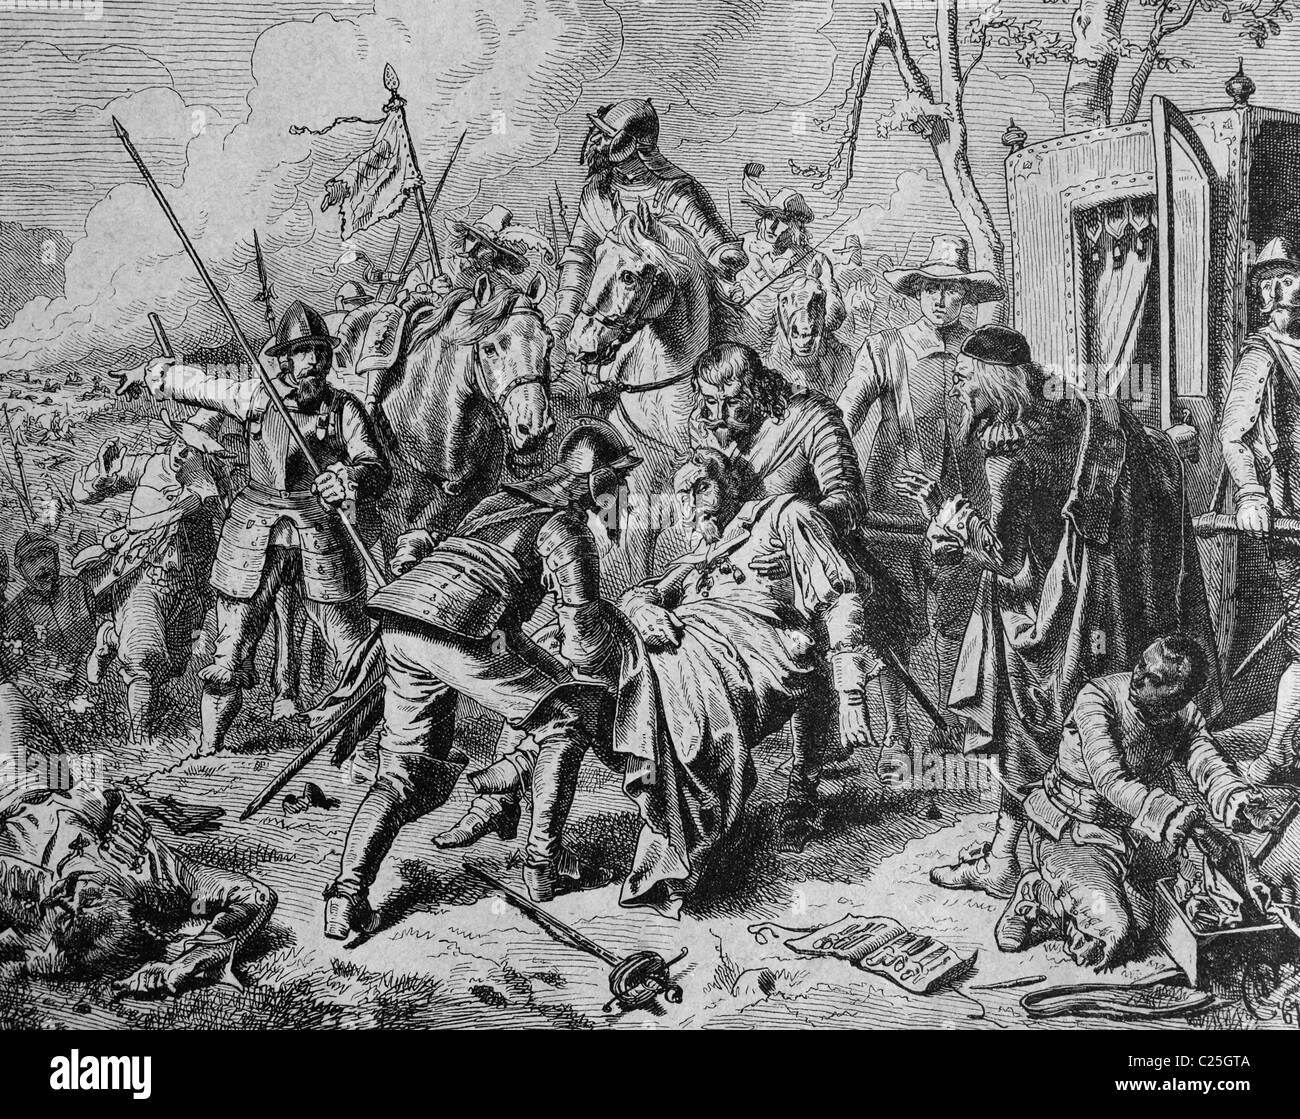 Johann Tserclaes, Count of Tilly, at the Battle of Lech, 15th April 1632, mortally injured, historic illustration, 1877 Stock Photo